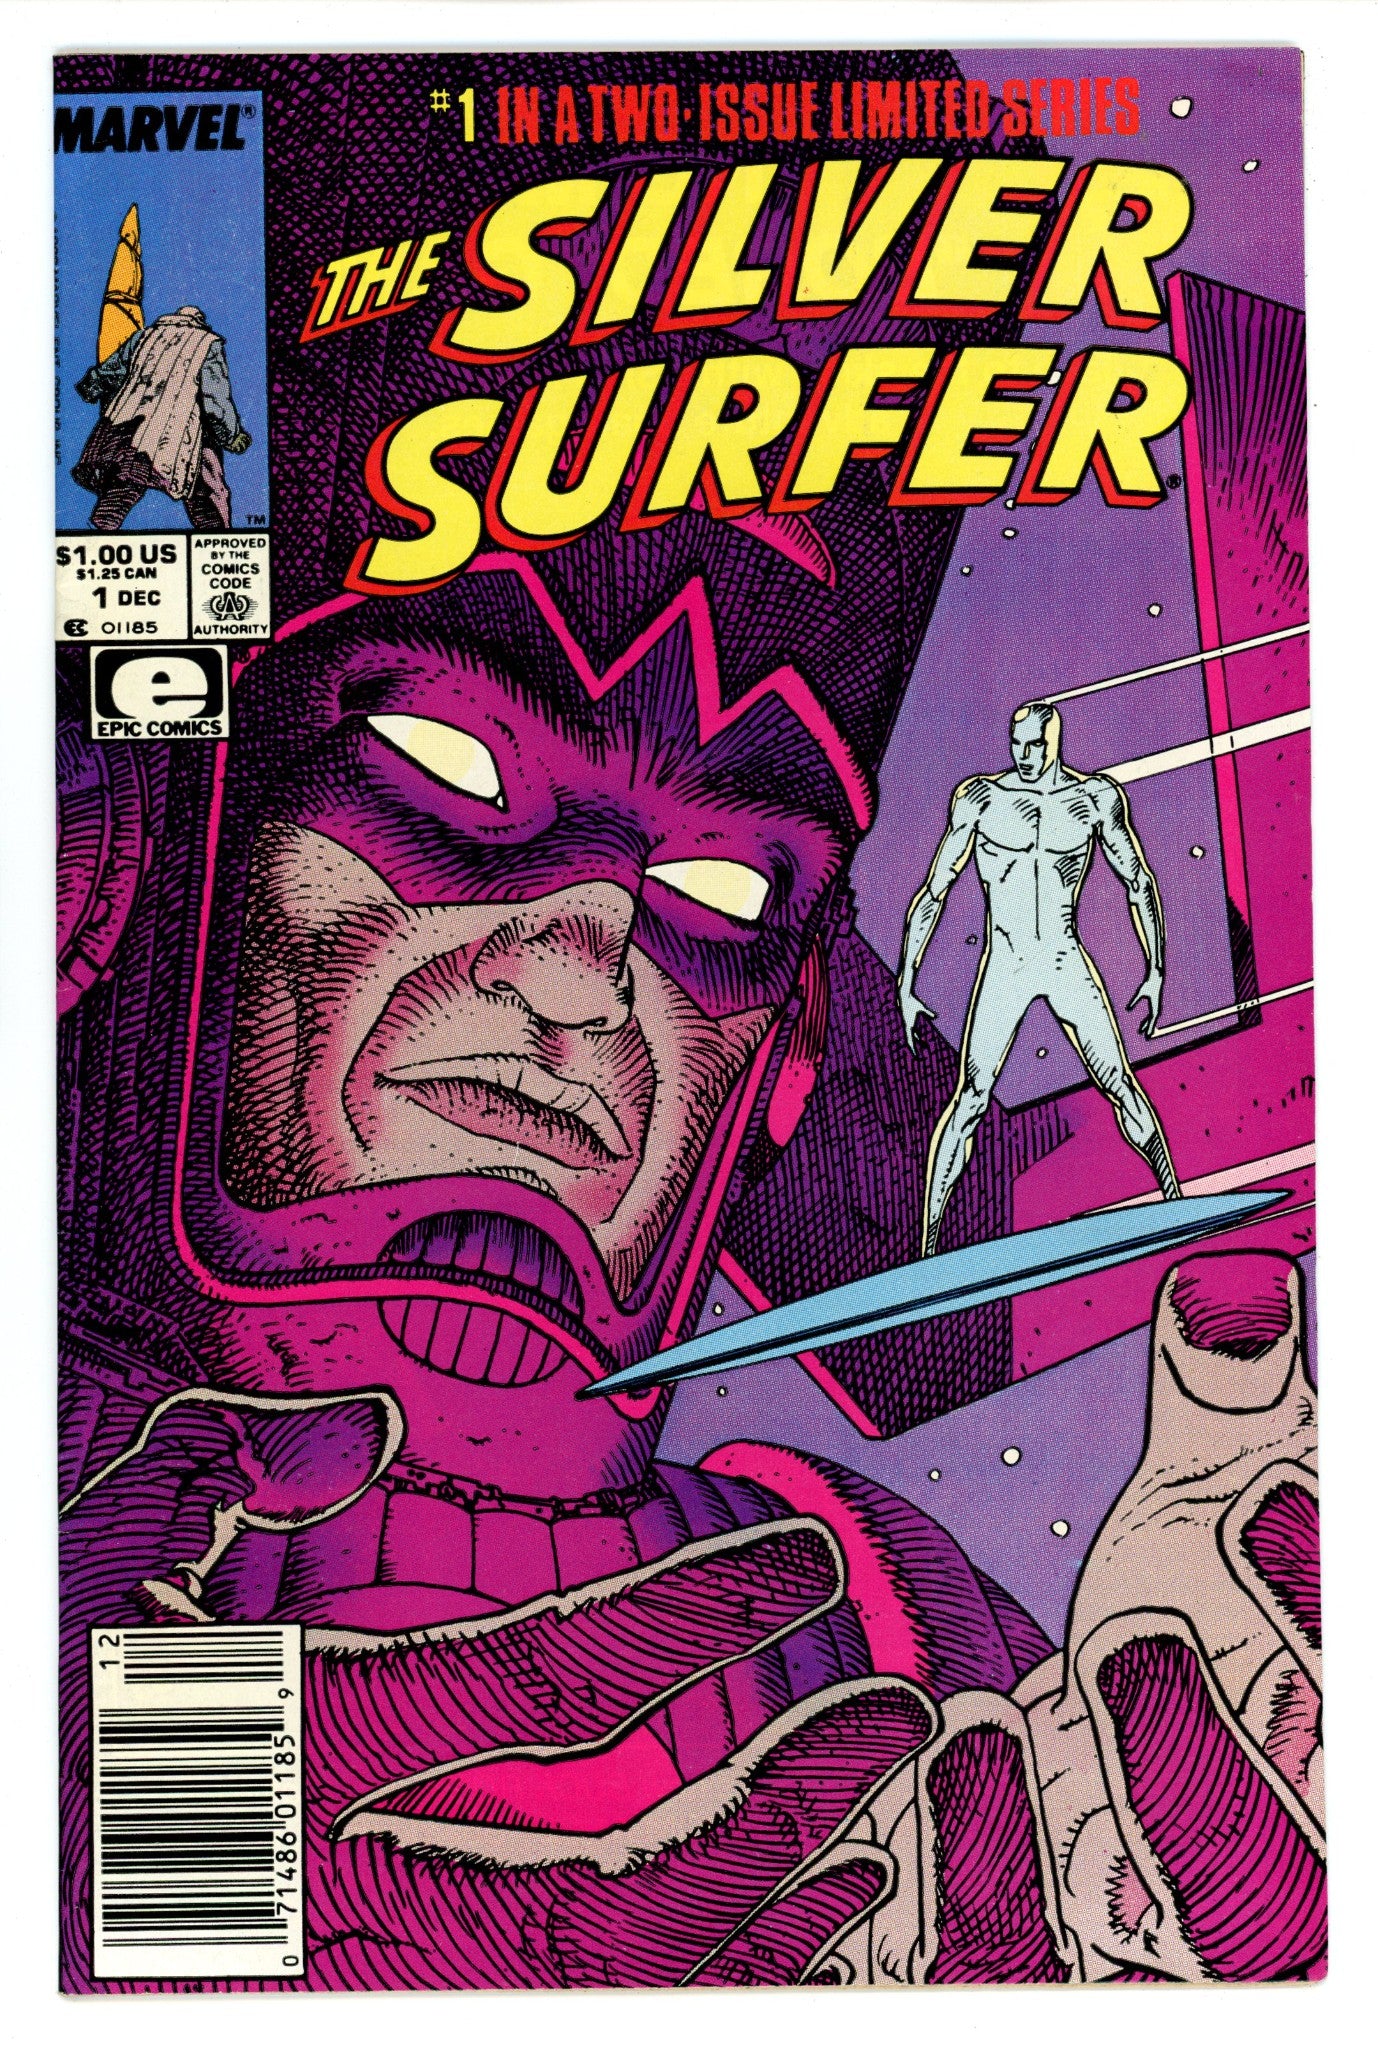 The Silver Surfer Vol 4 1 VF (8.0) (1988) Newsstand 